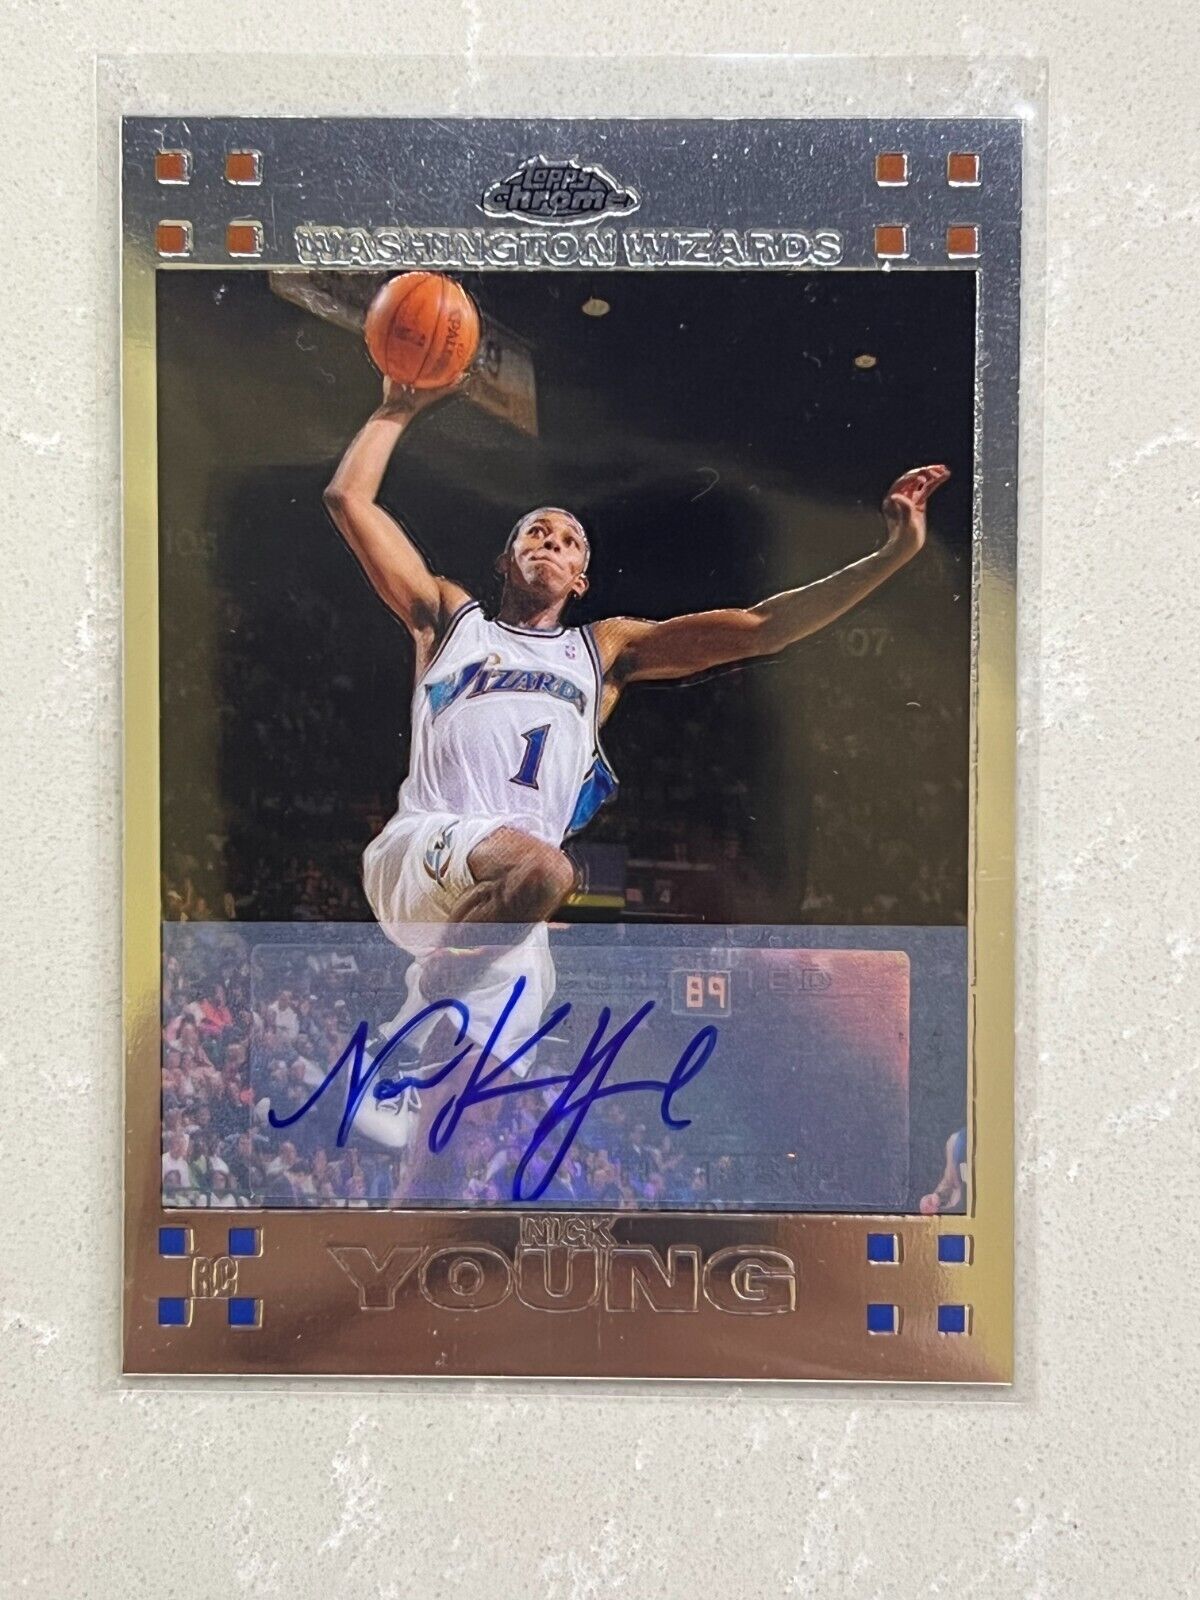 2007-08 Topps Chrome Nick Young Rookie Card Auto (RC) #145 /149 WOW Swaggy ??. rookie card picture